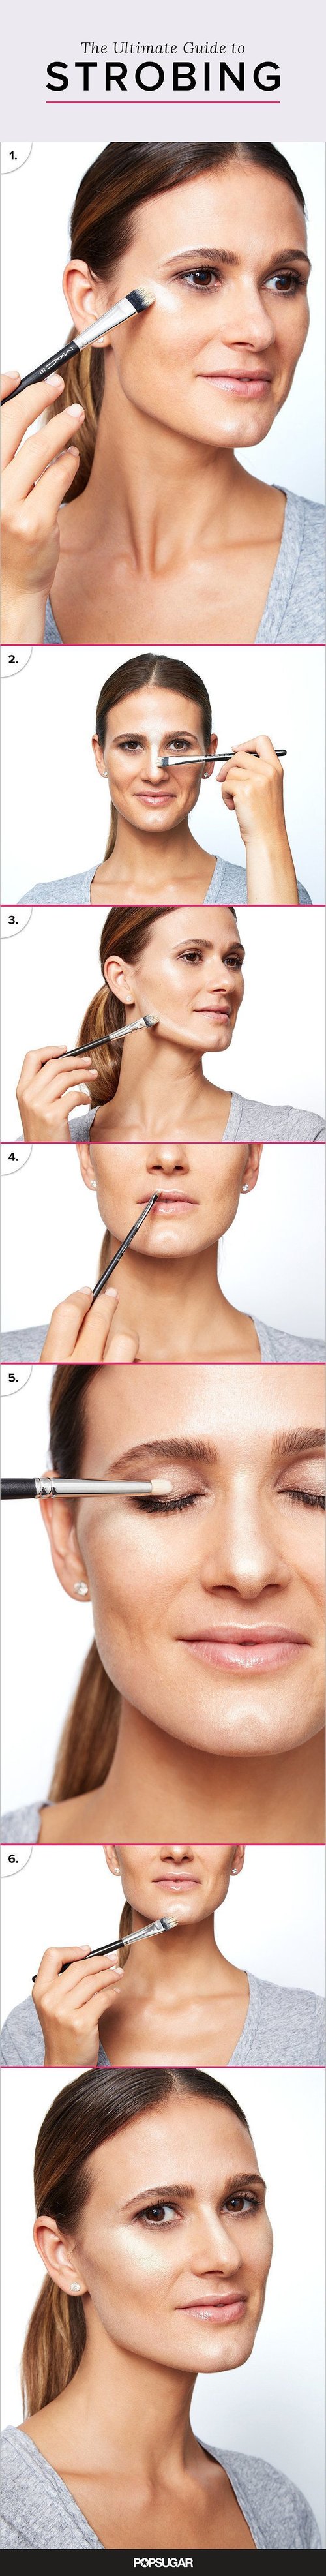 7 Highlighter Hacks That'll Instantly Give You a Gorgeous Glow